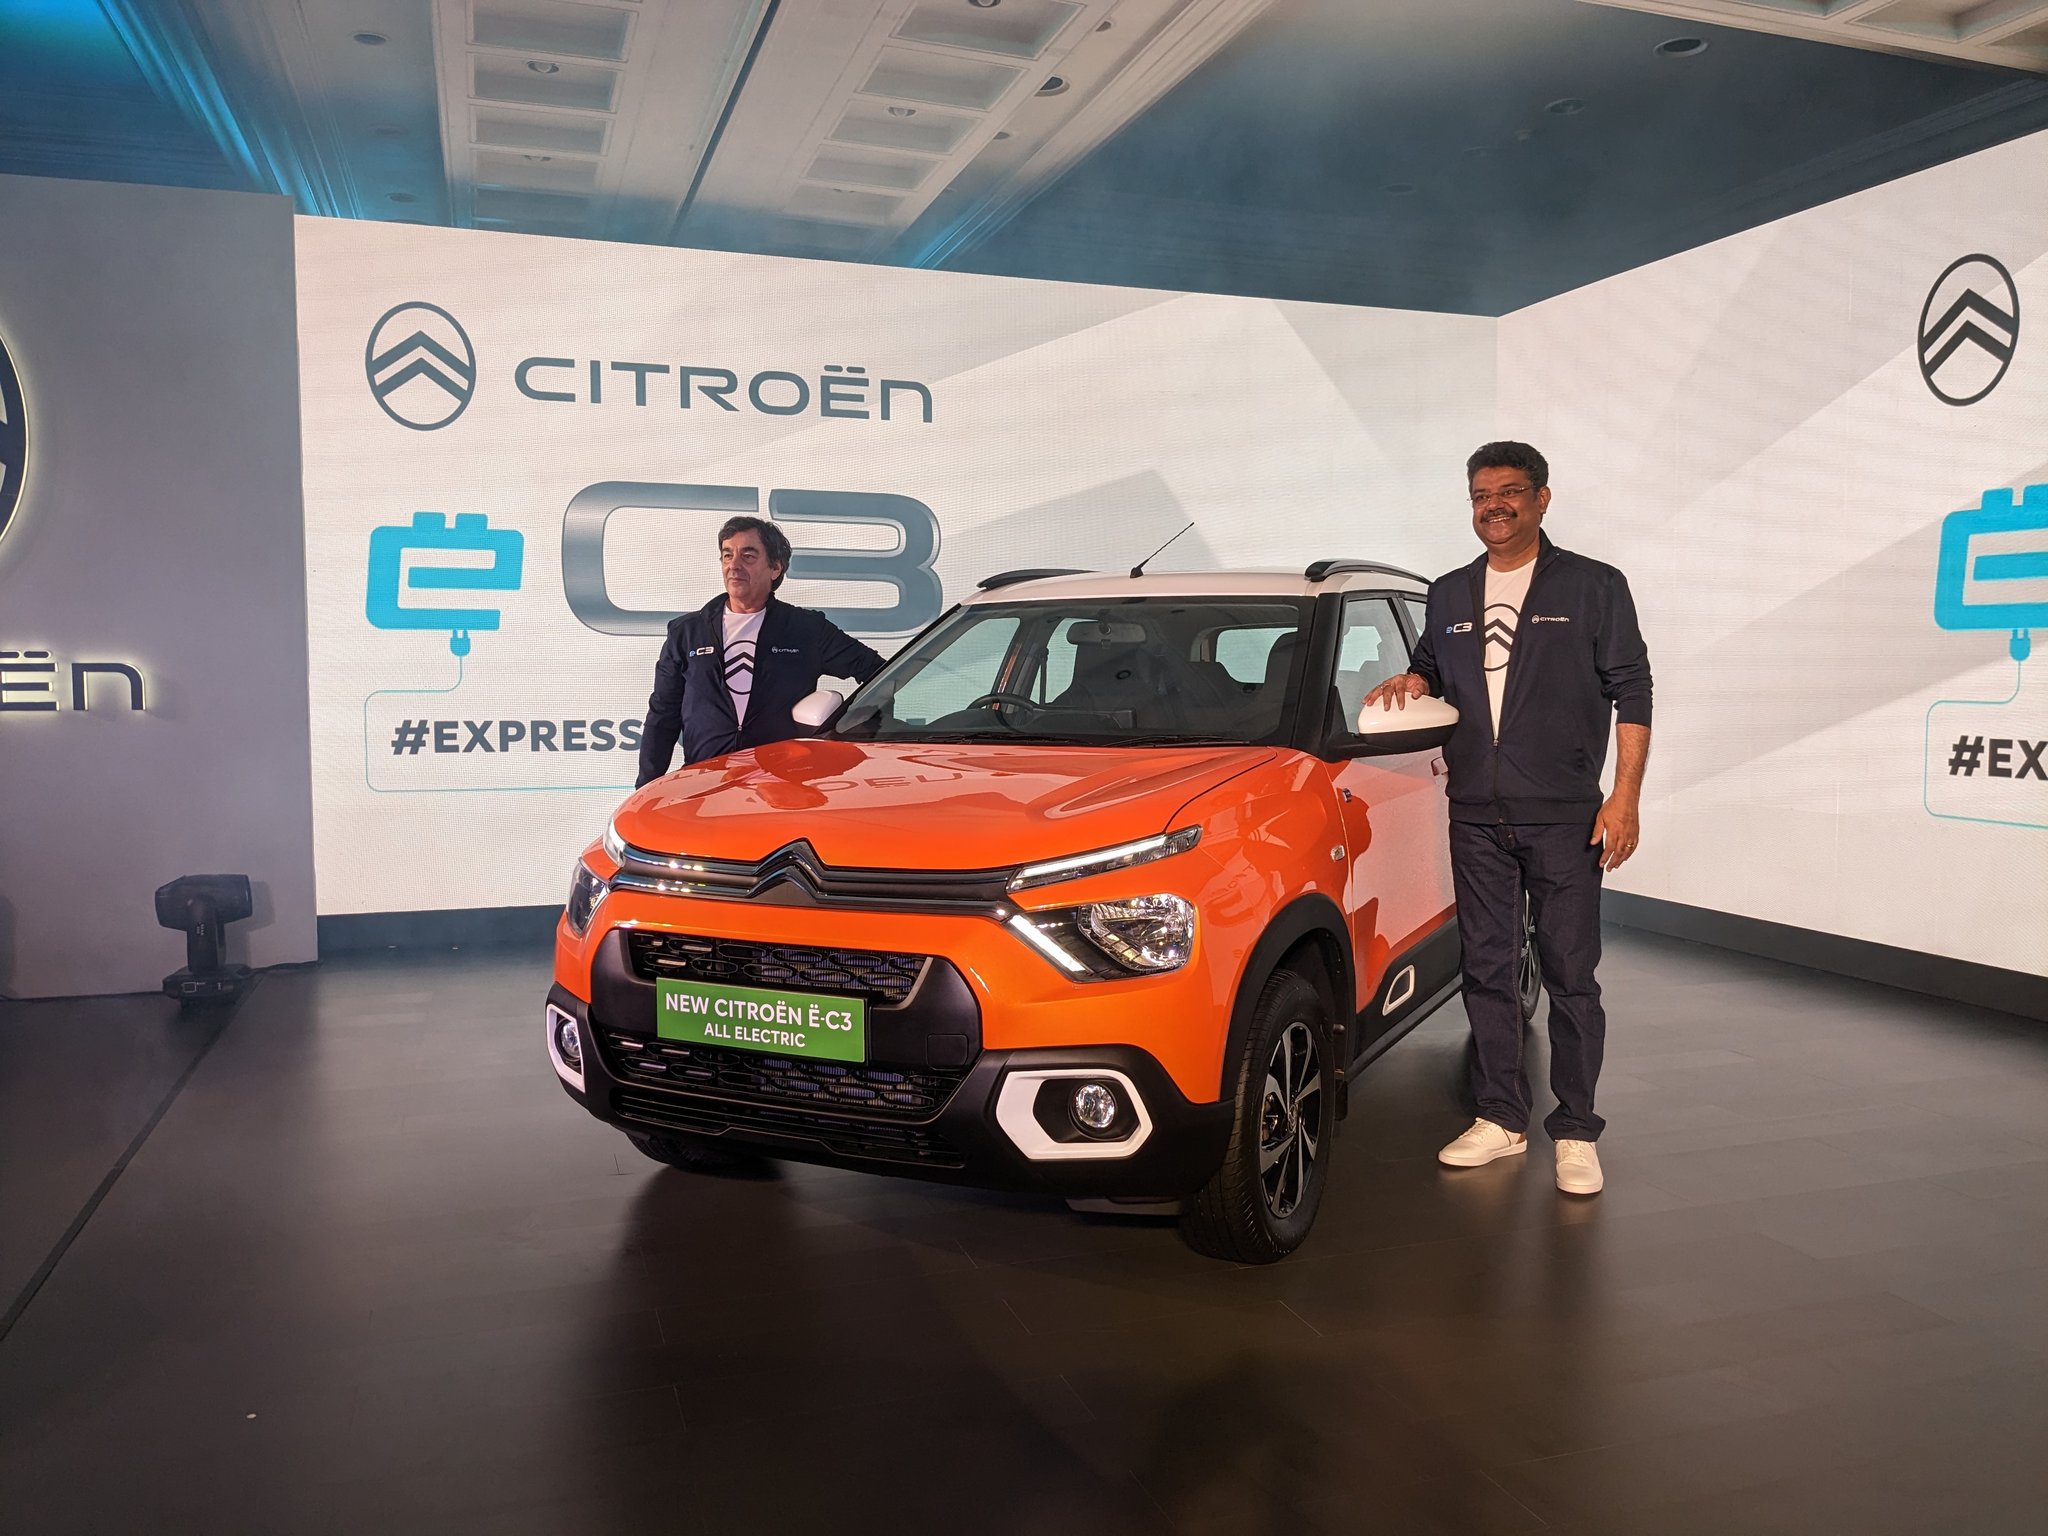 Citroen eC3 Electric SUV unveiled in India with Range of 320 km